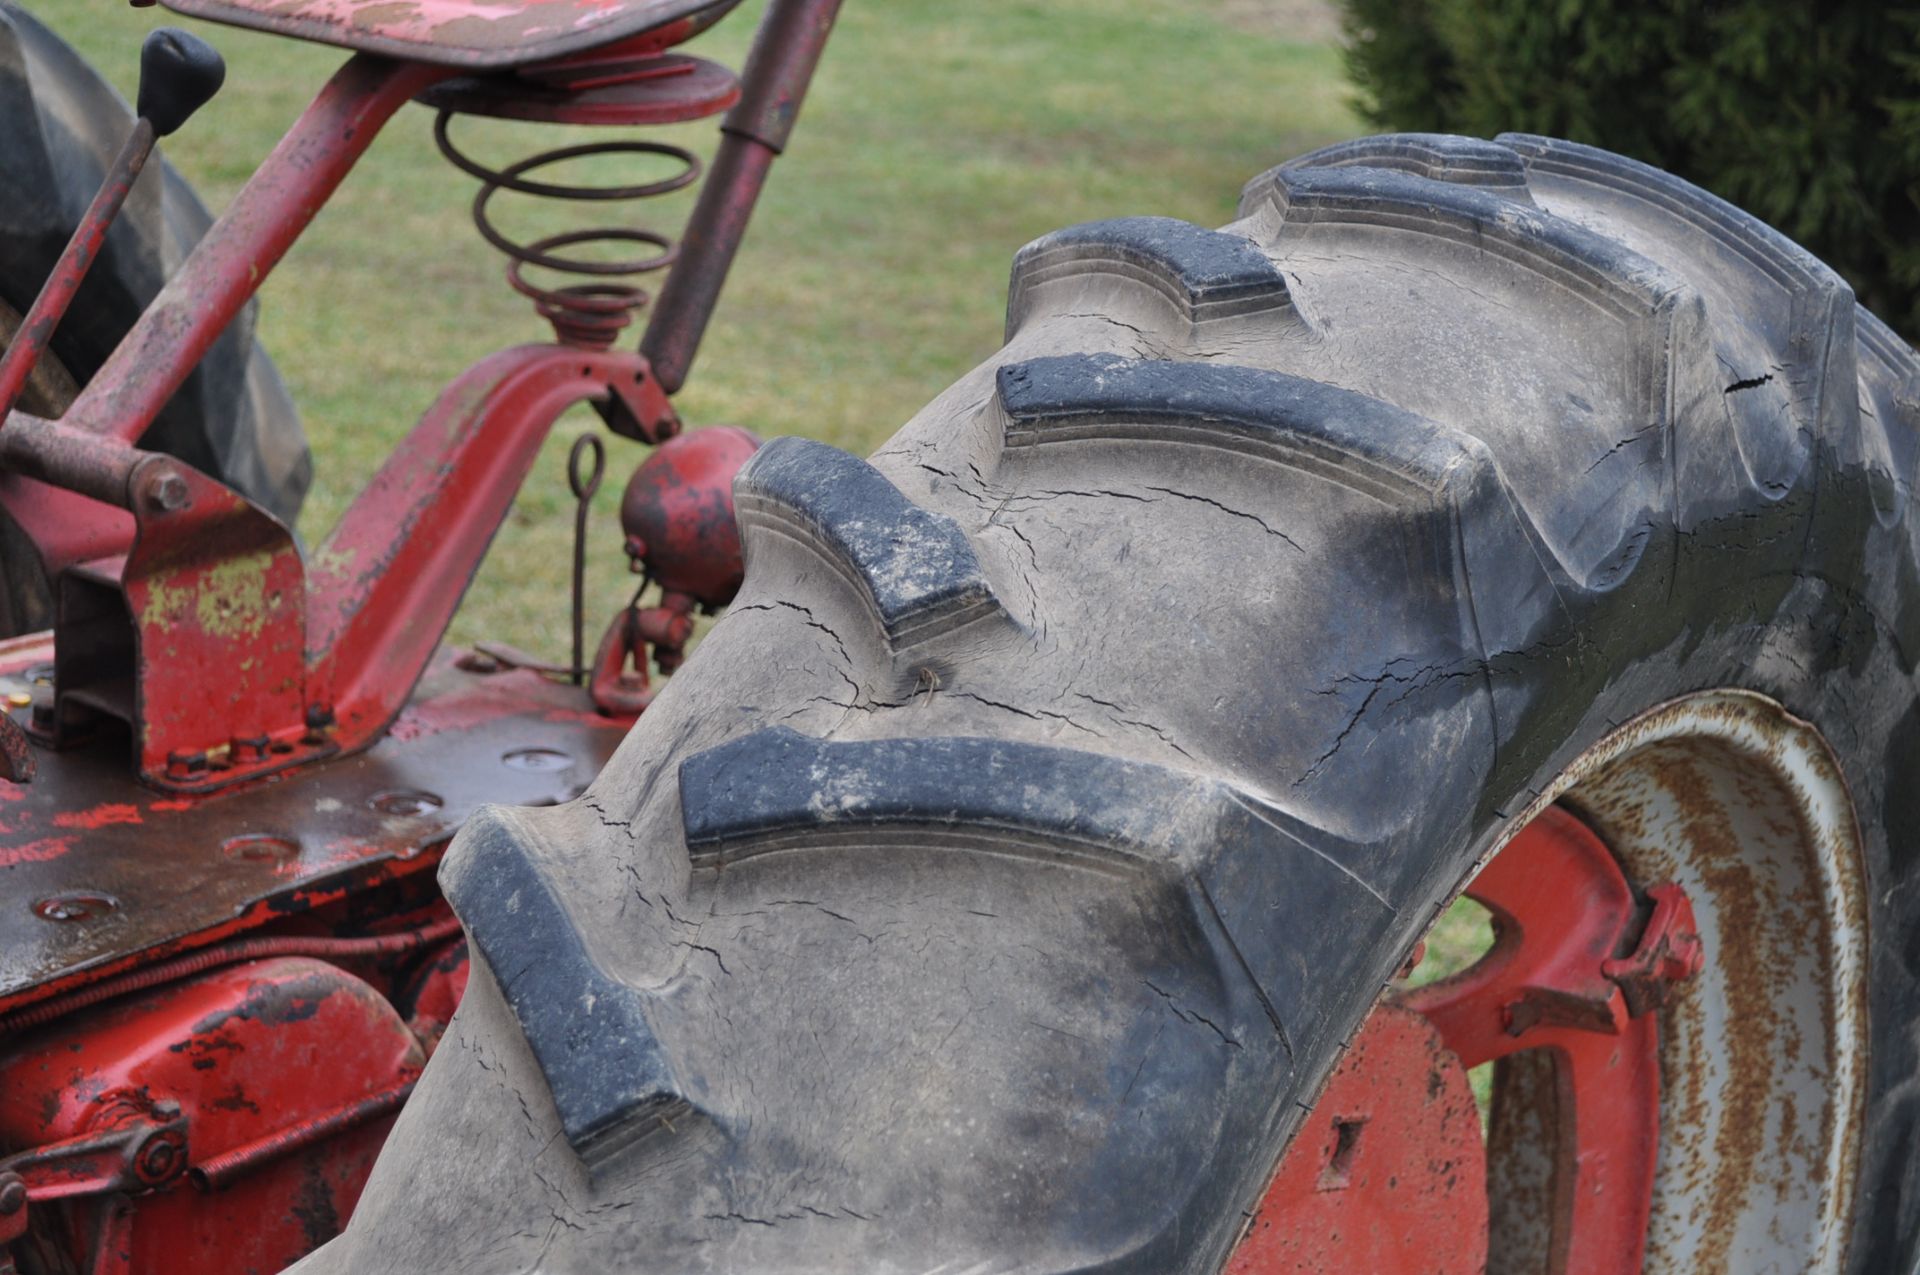 McCormick Farmall H tractor, 12.4-38 rear, narrow front, side pulley, 540 pto, SN FBH273308XL - Image 6 of 14